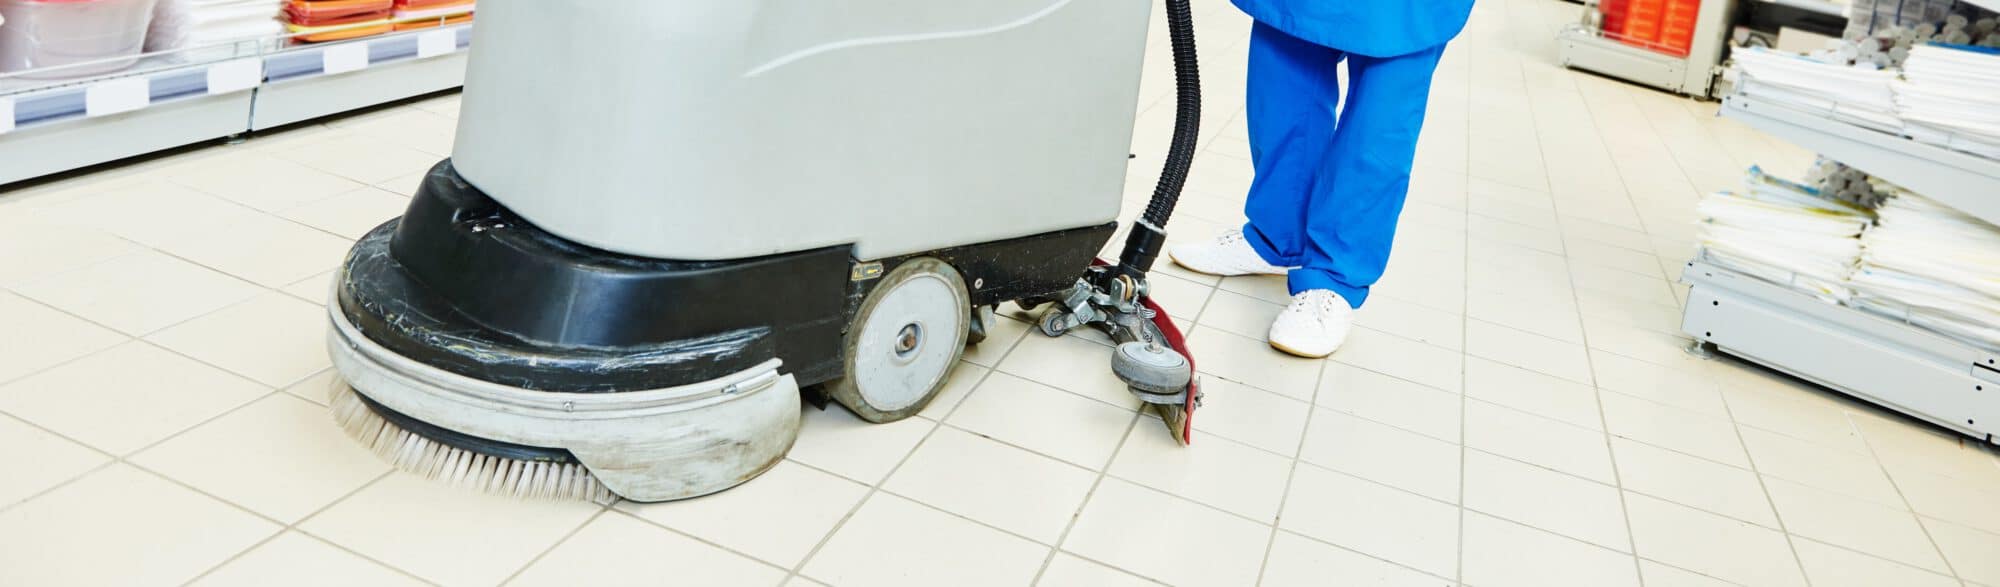 Floor cleaning services with washing machine in supermarket shop store